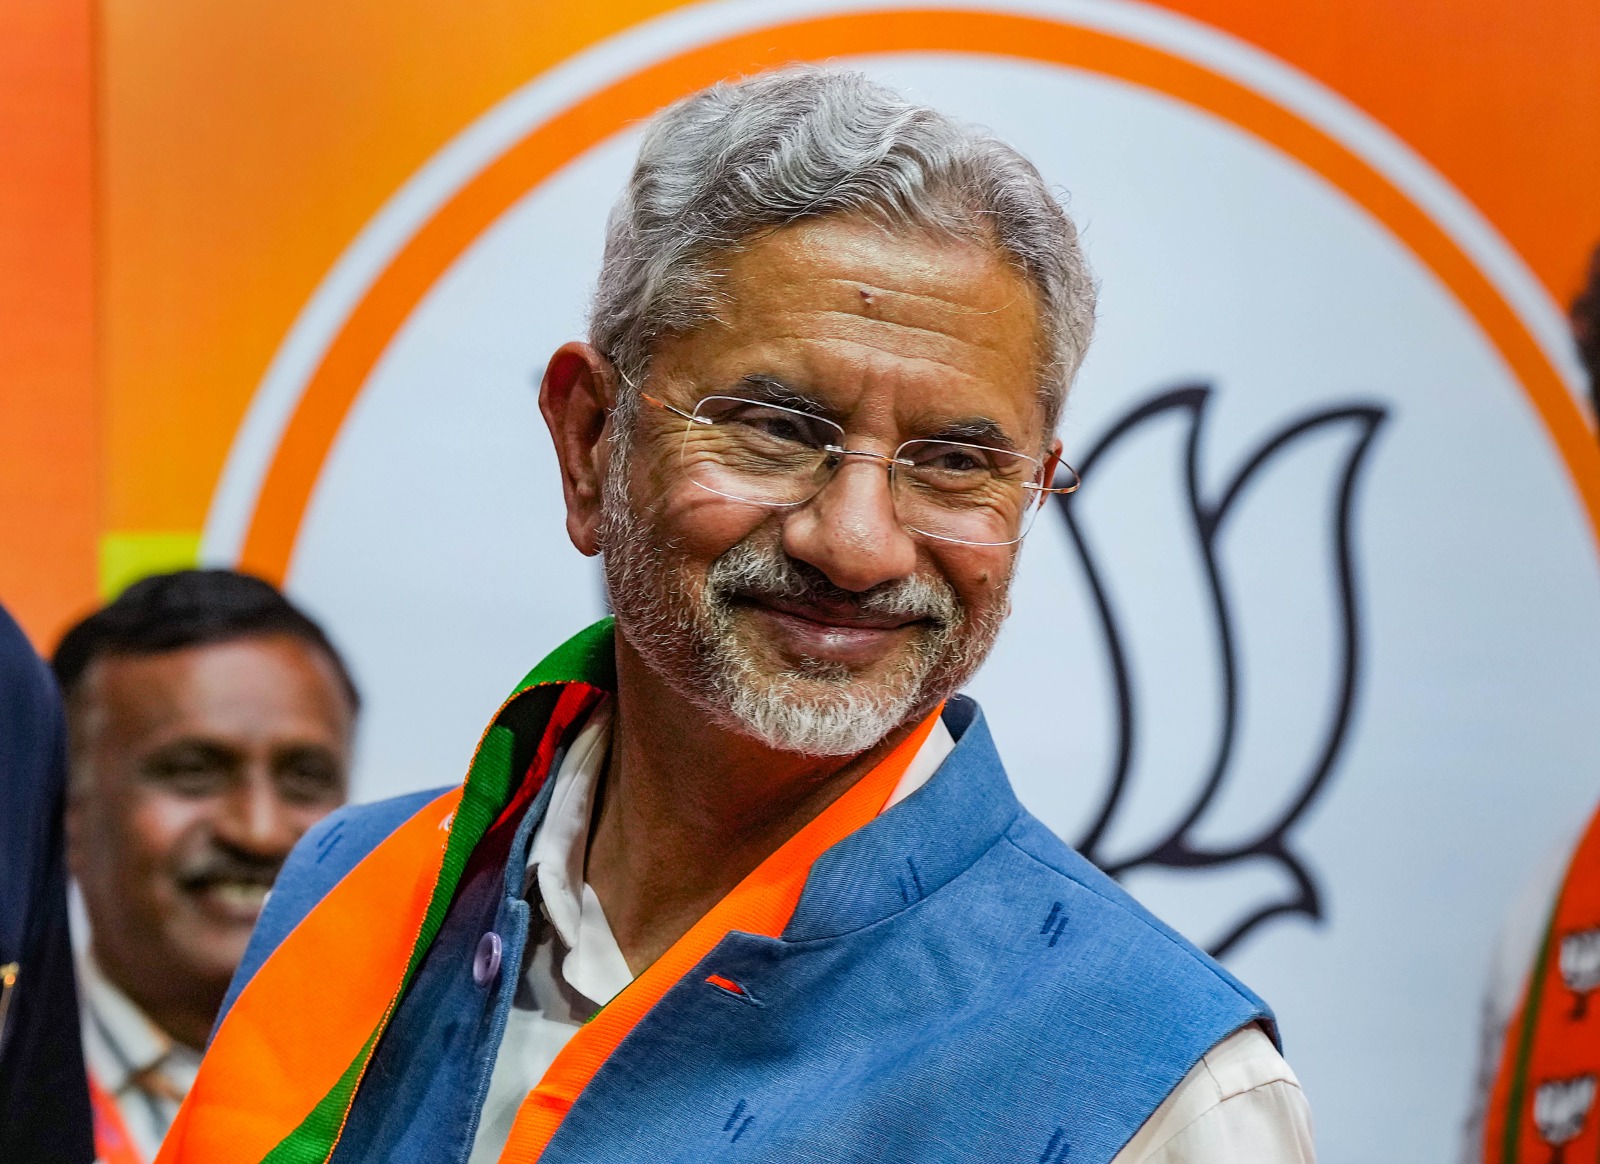 India is challenging ratings that influence sense of stability in the country: S Jaishankar